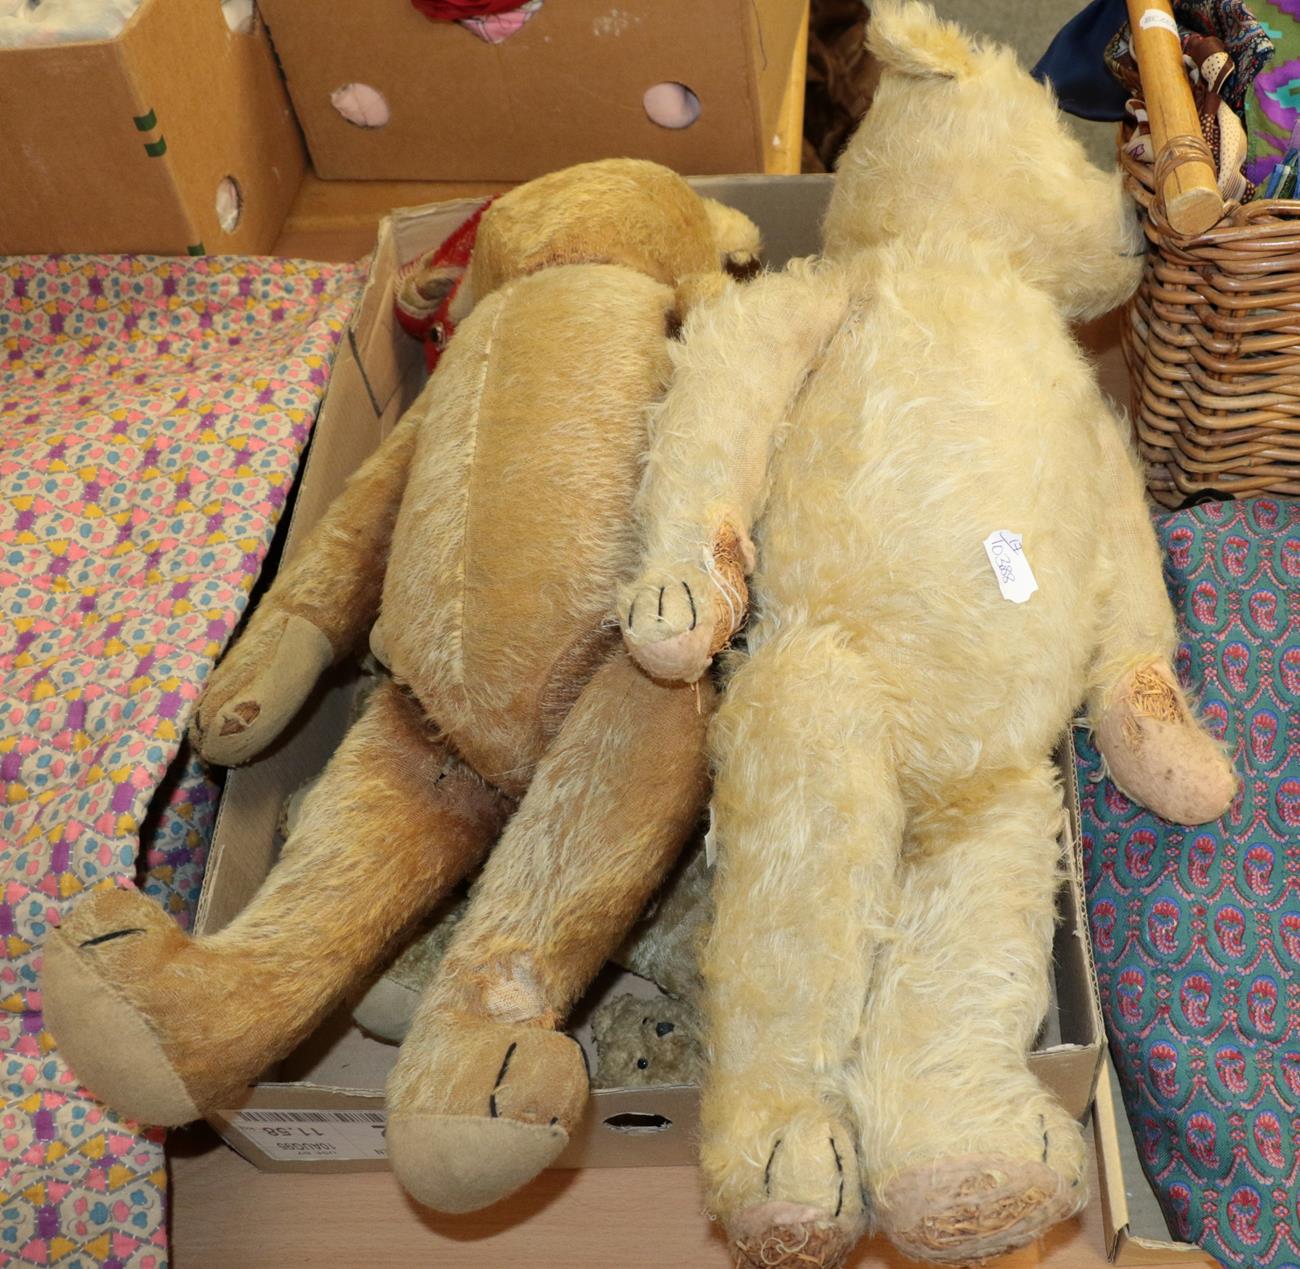 Possibly Farnell seated rabbit, another smaller, cotton plush curly teddy bear with jointed body,